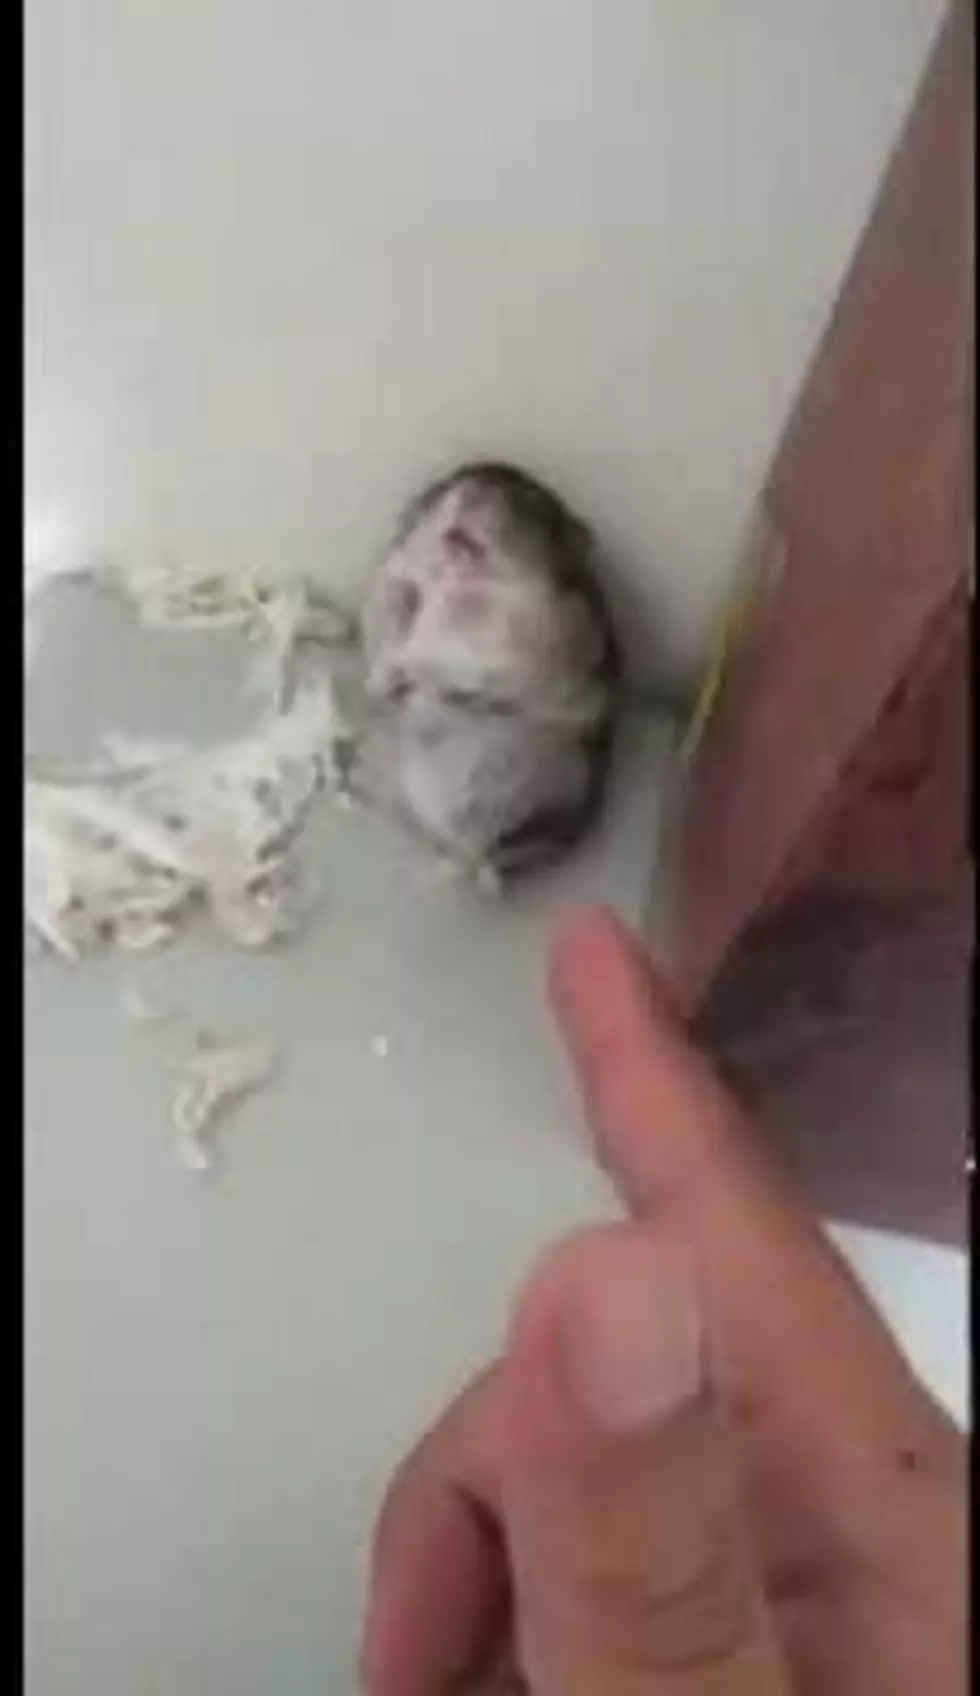 Hamster Plays ‘Dead’ On Cue [Video]